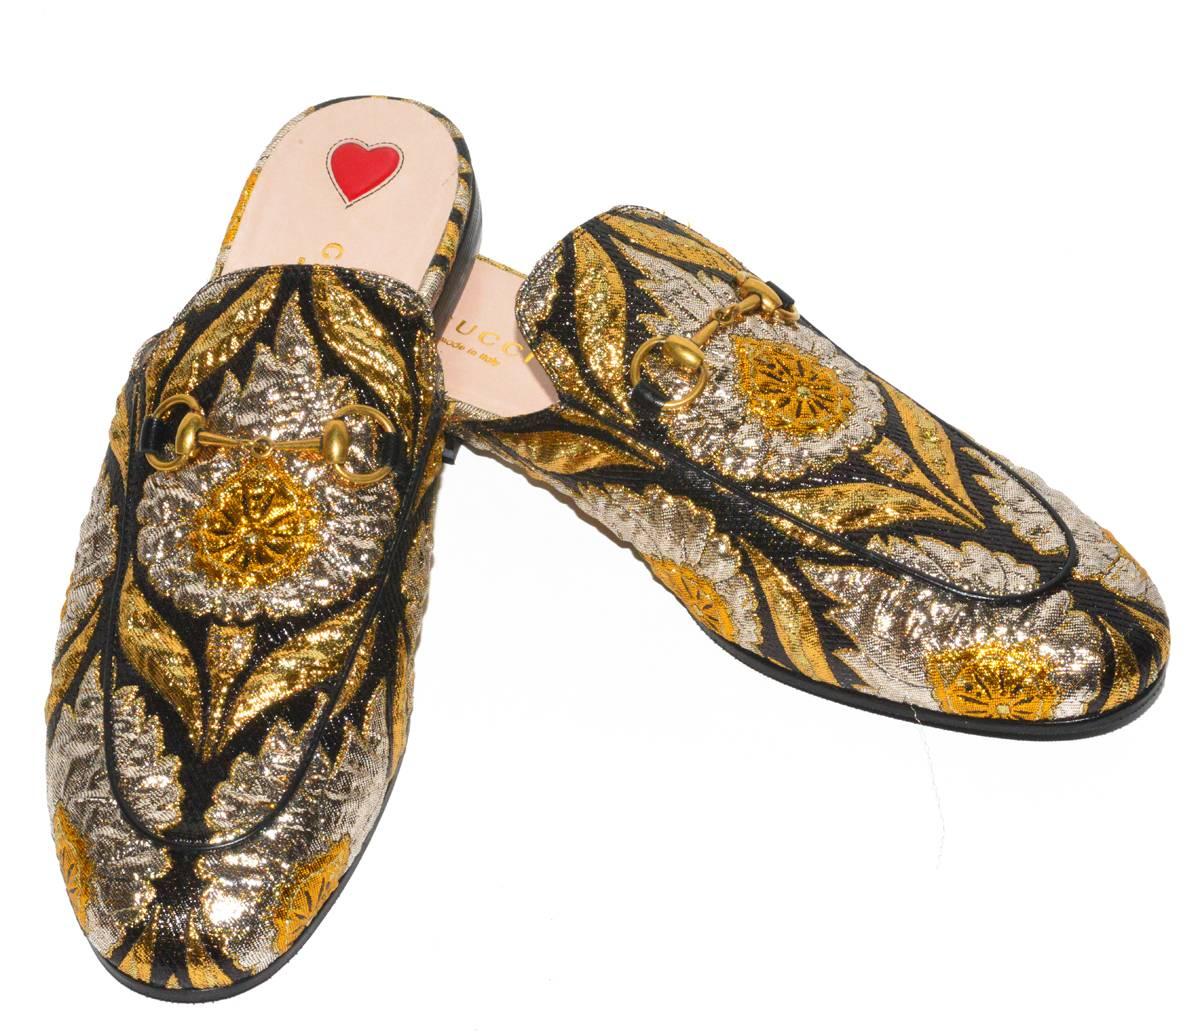 Never worn, Gucci gold embroidered mules size 40 (9)...Pristine and gorgeous!